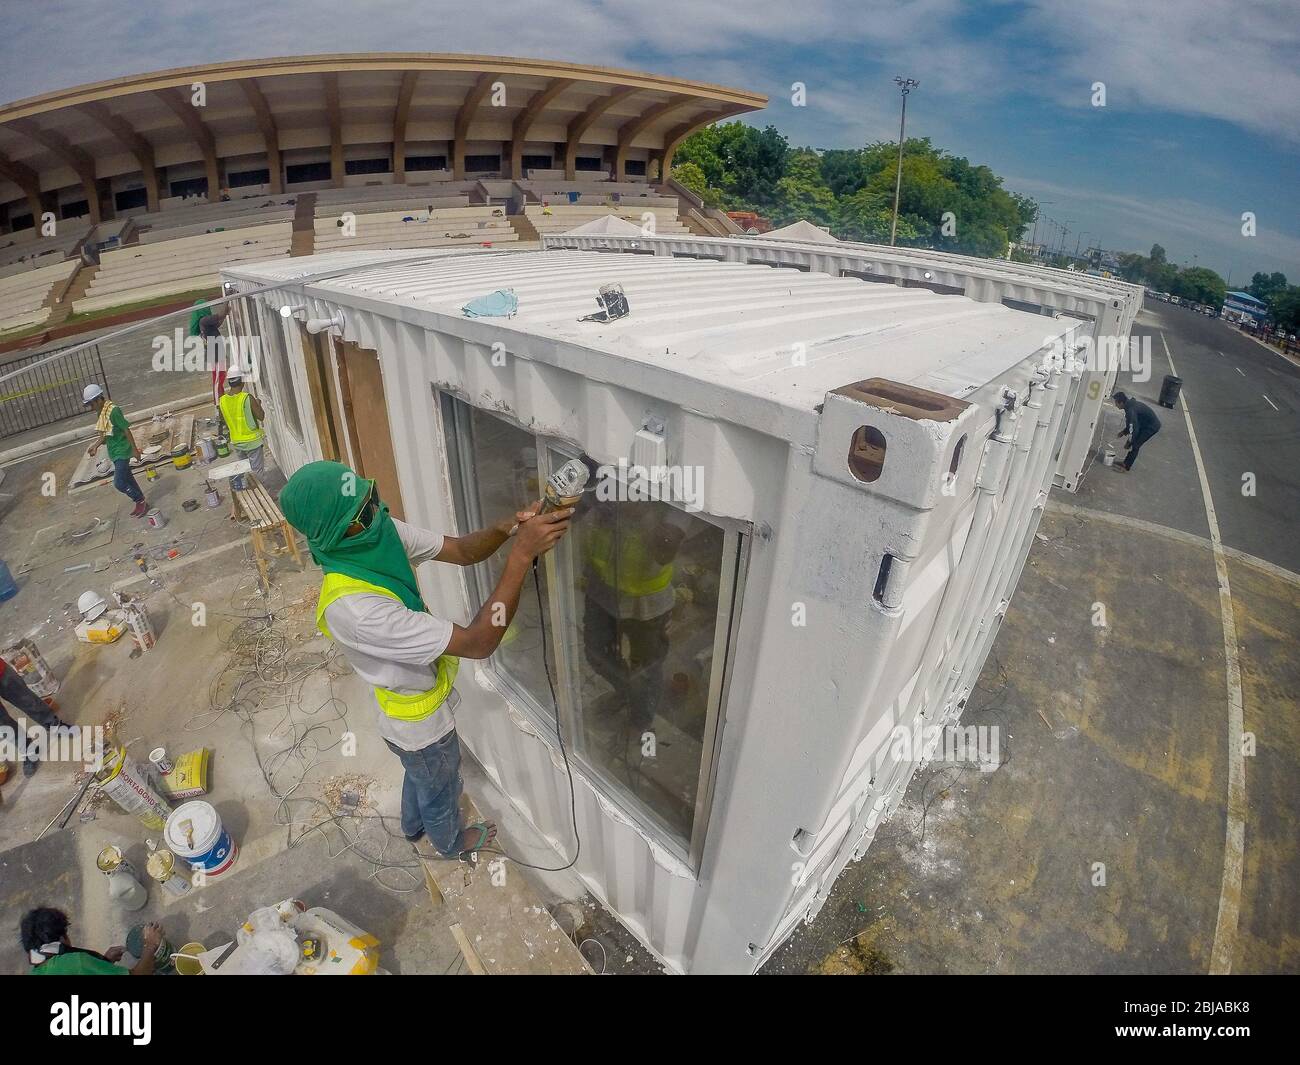 Manila, Philippines. 29th Apr, 2020. Workers from Department of Public Works and Highways (DPWH) of the Philippines prepare containers that will be converted into temporary medical facilities in Manila, the Philippines, on April 29, 2020. Credit: Rouelle Umali/Xinhua/Alamy Live News Stock Photo